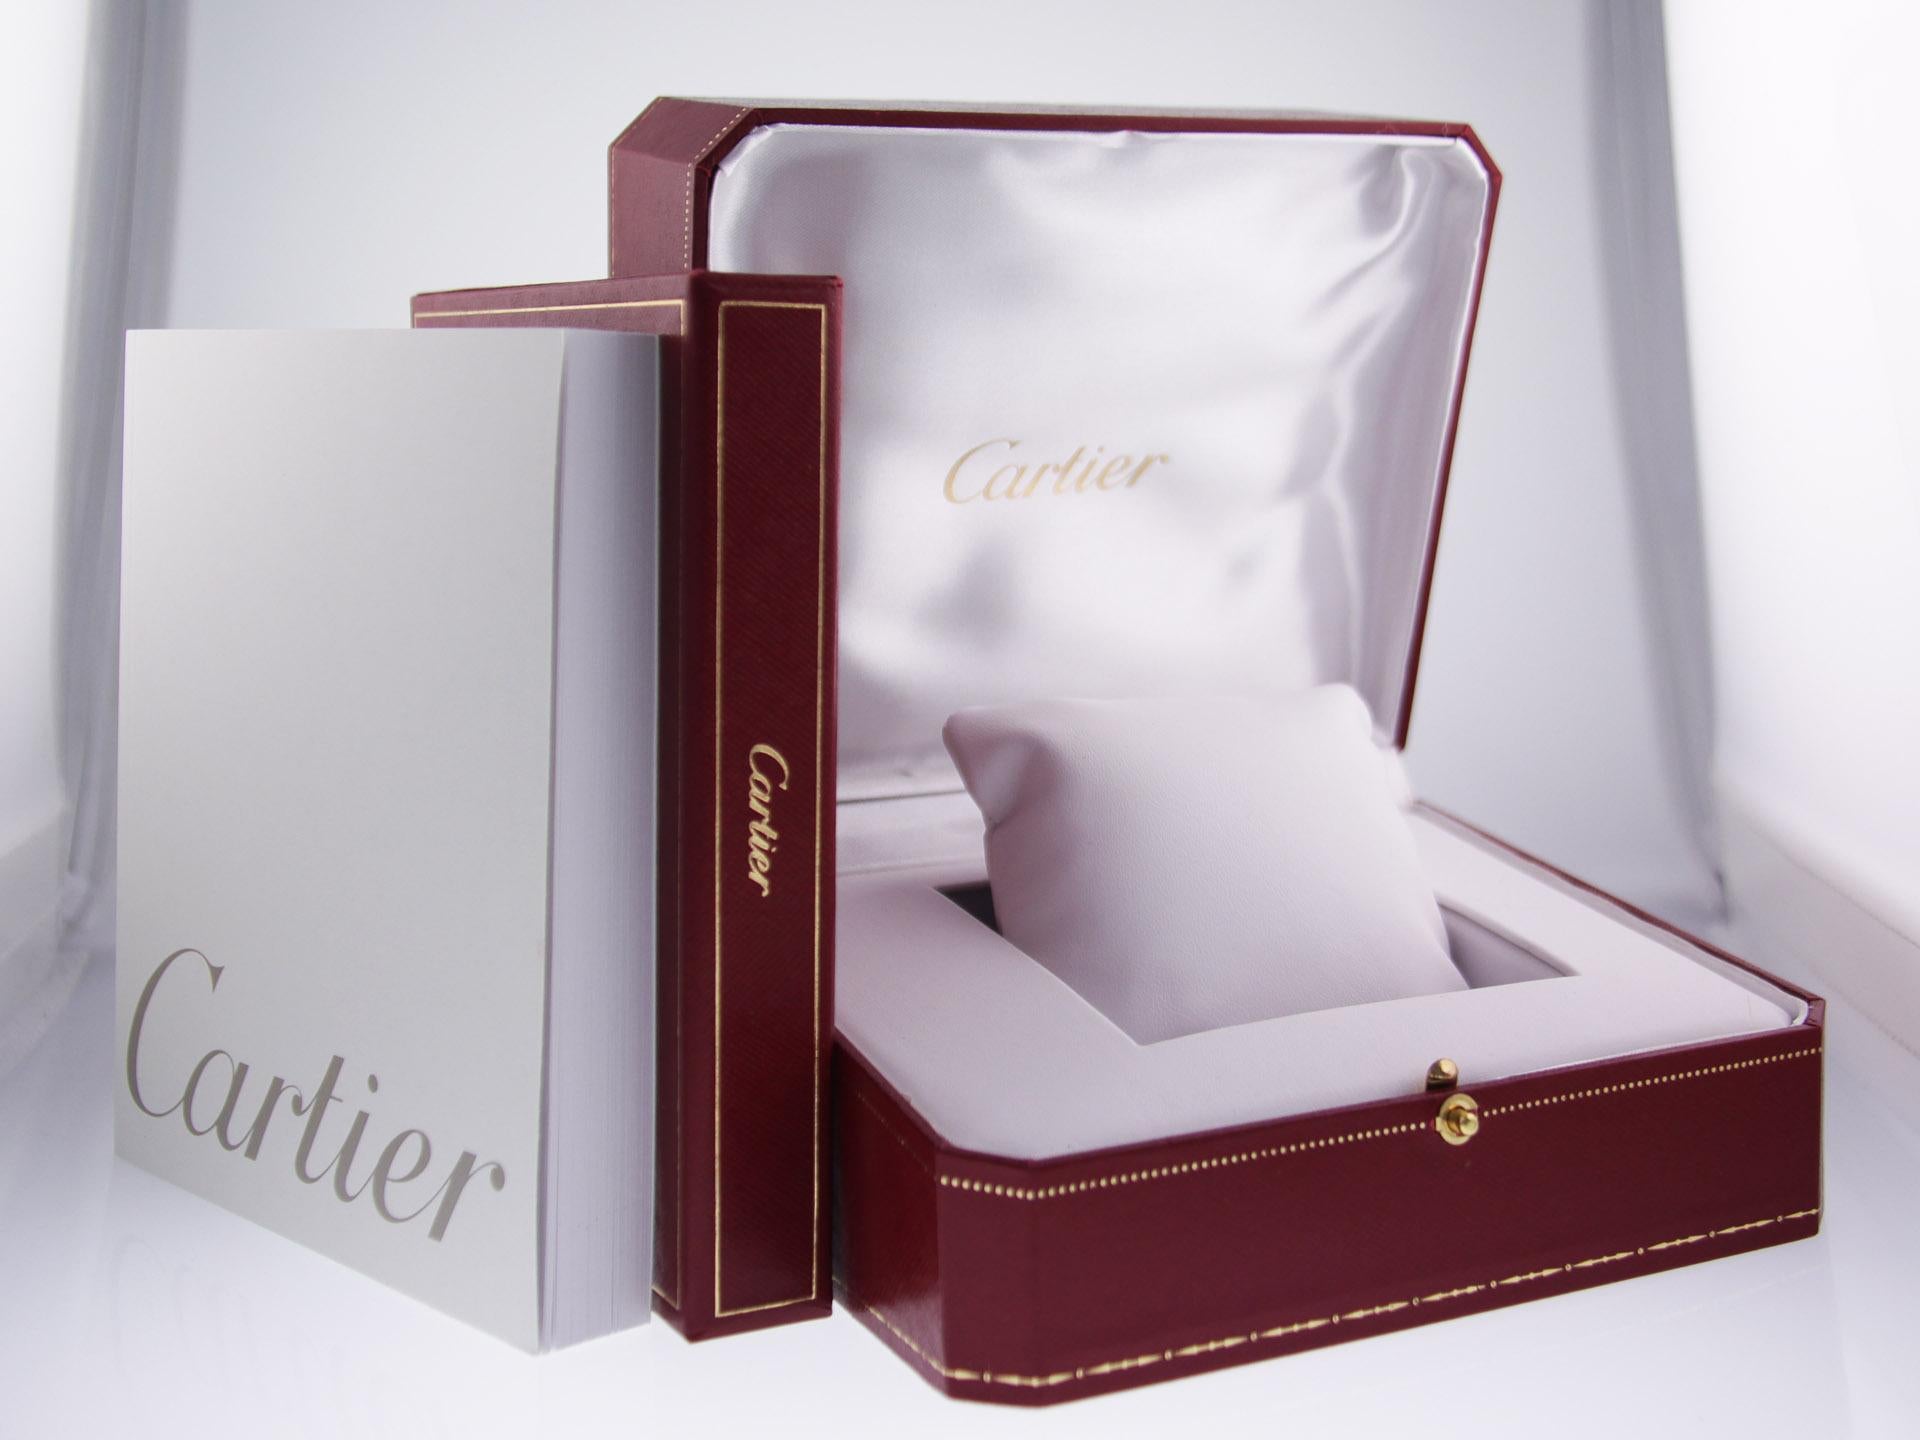 Stainless steel & 18K pink gold Cartier Ballon Bleu de Cartier WE902054 watch, water resistance to 30m, with diamond indexes. Comes with Cartier Box.

Watch	
Brand:	Cartier
Series:	Ballon Bleu de Cartier
Model